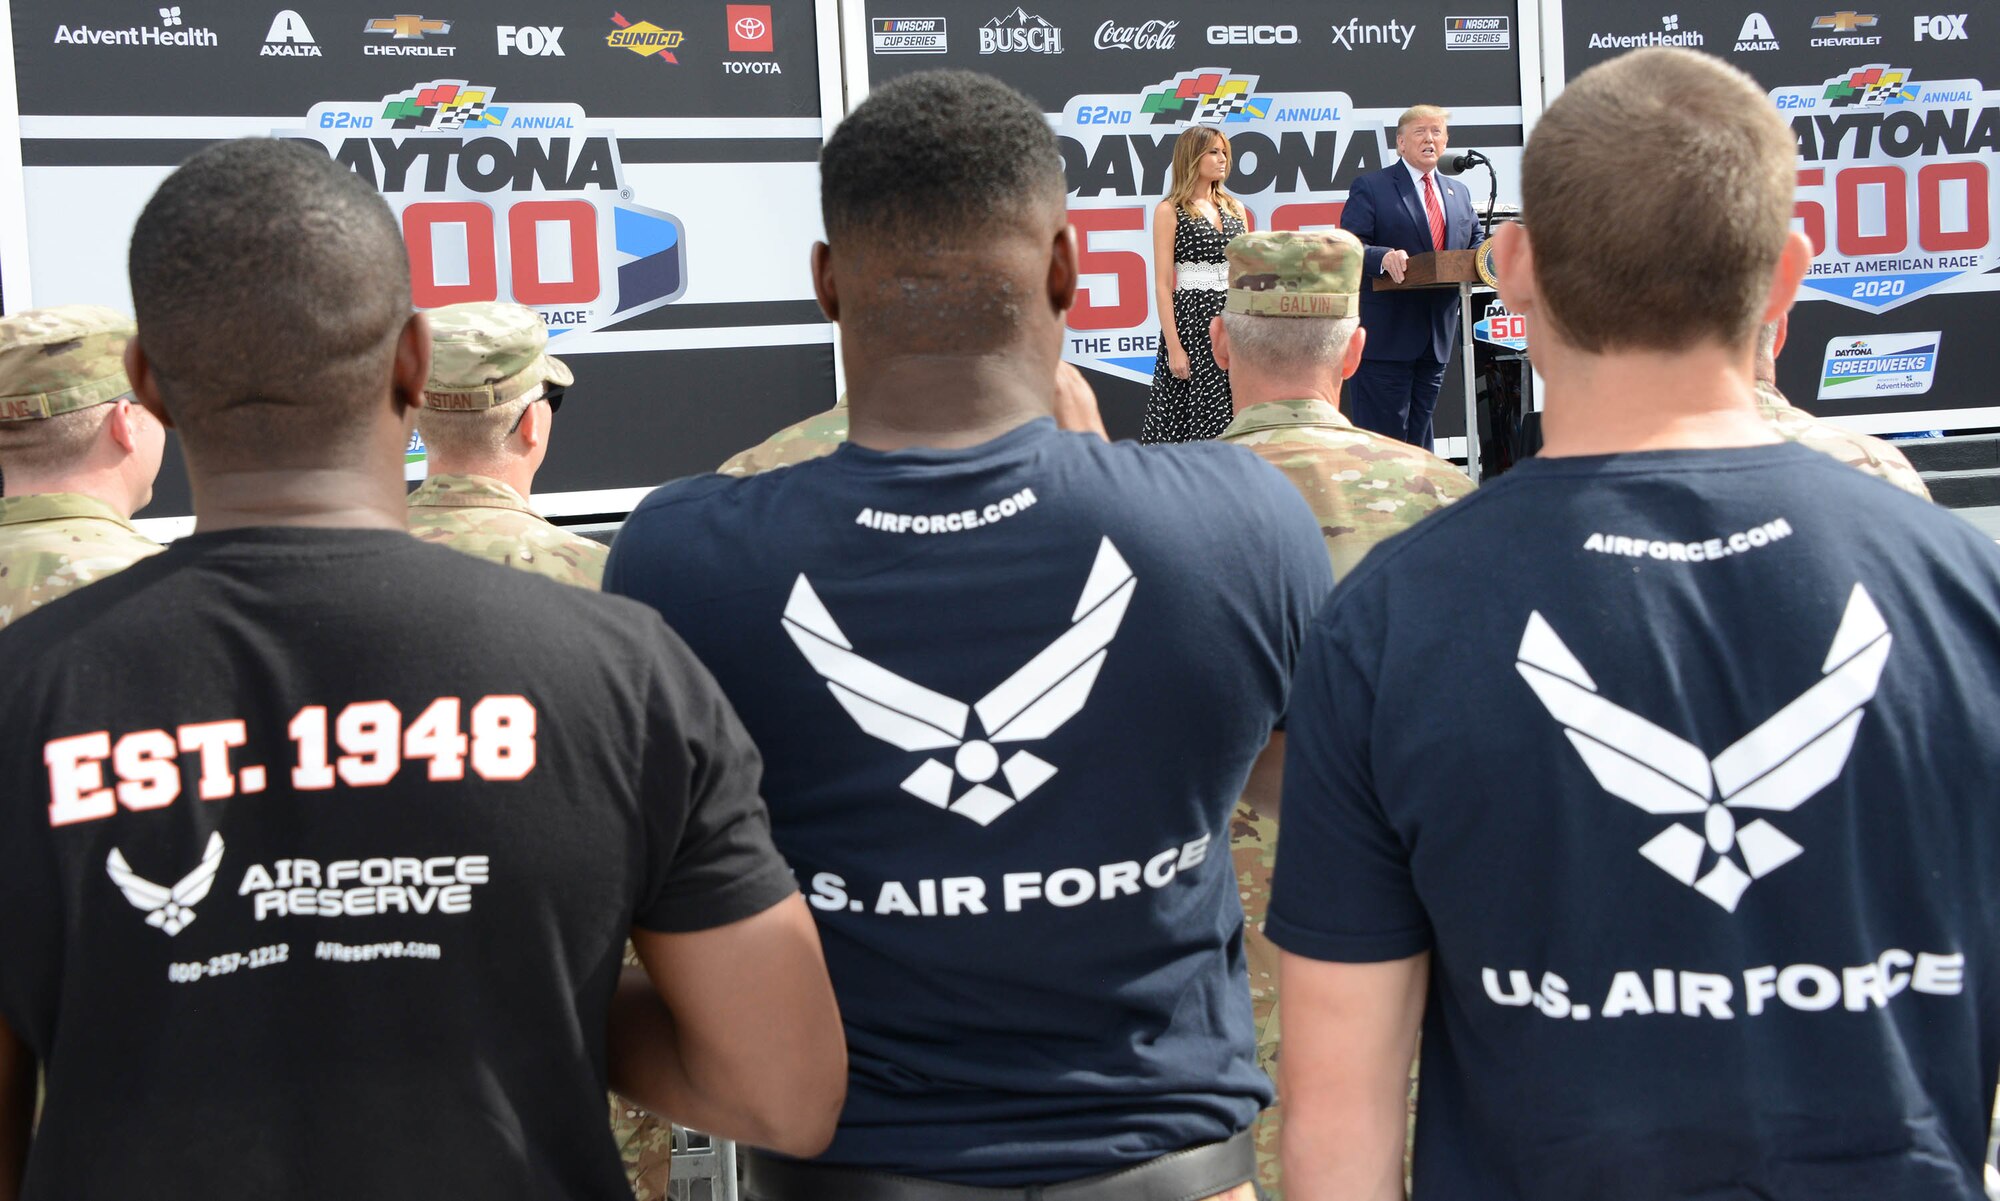 President Donald J. Trump talks to a small group prior to the start of the Daytona 500. During his speech he congratulates the Air Force's newest members